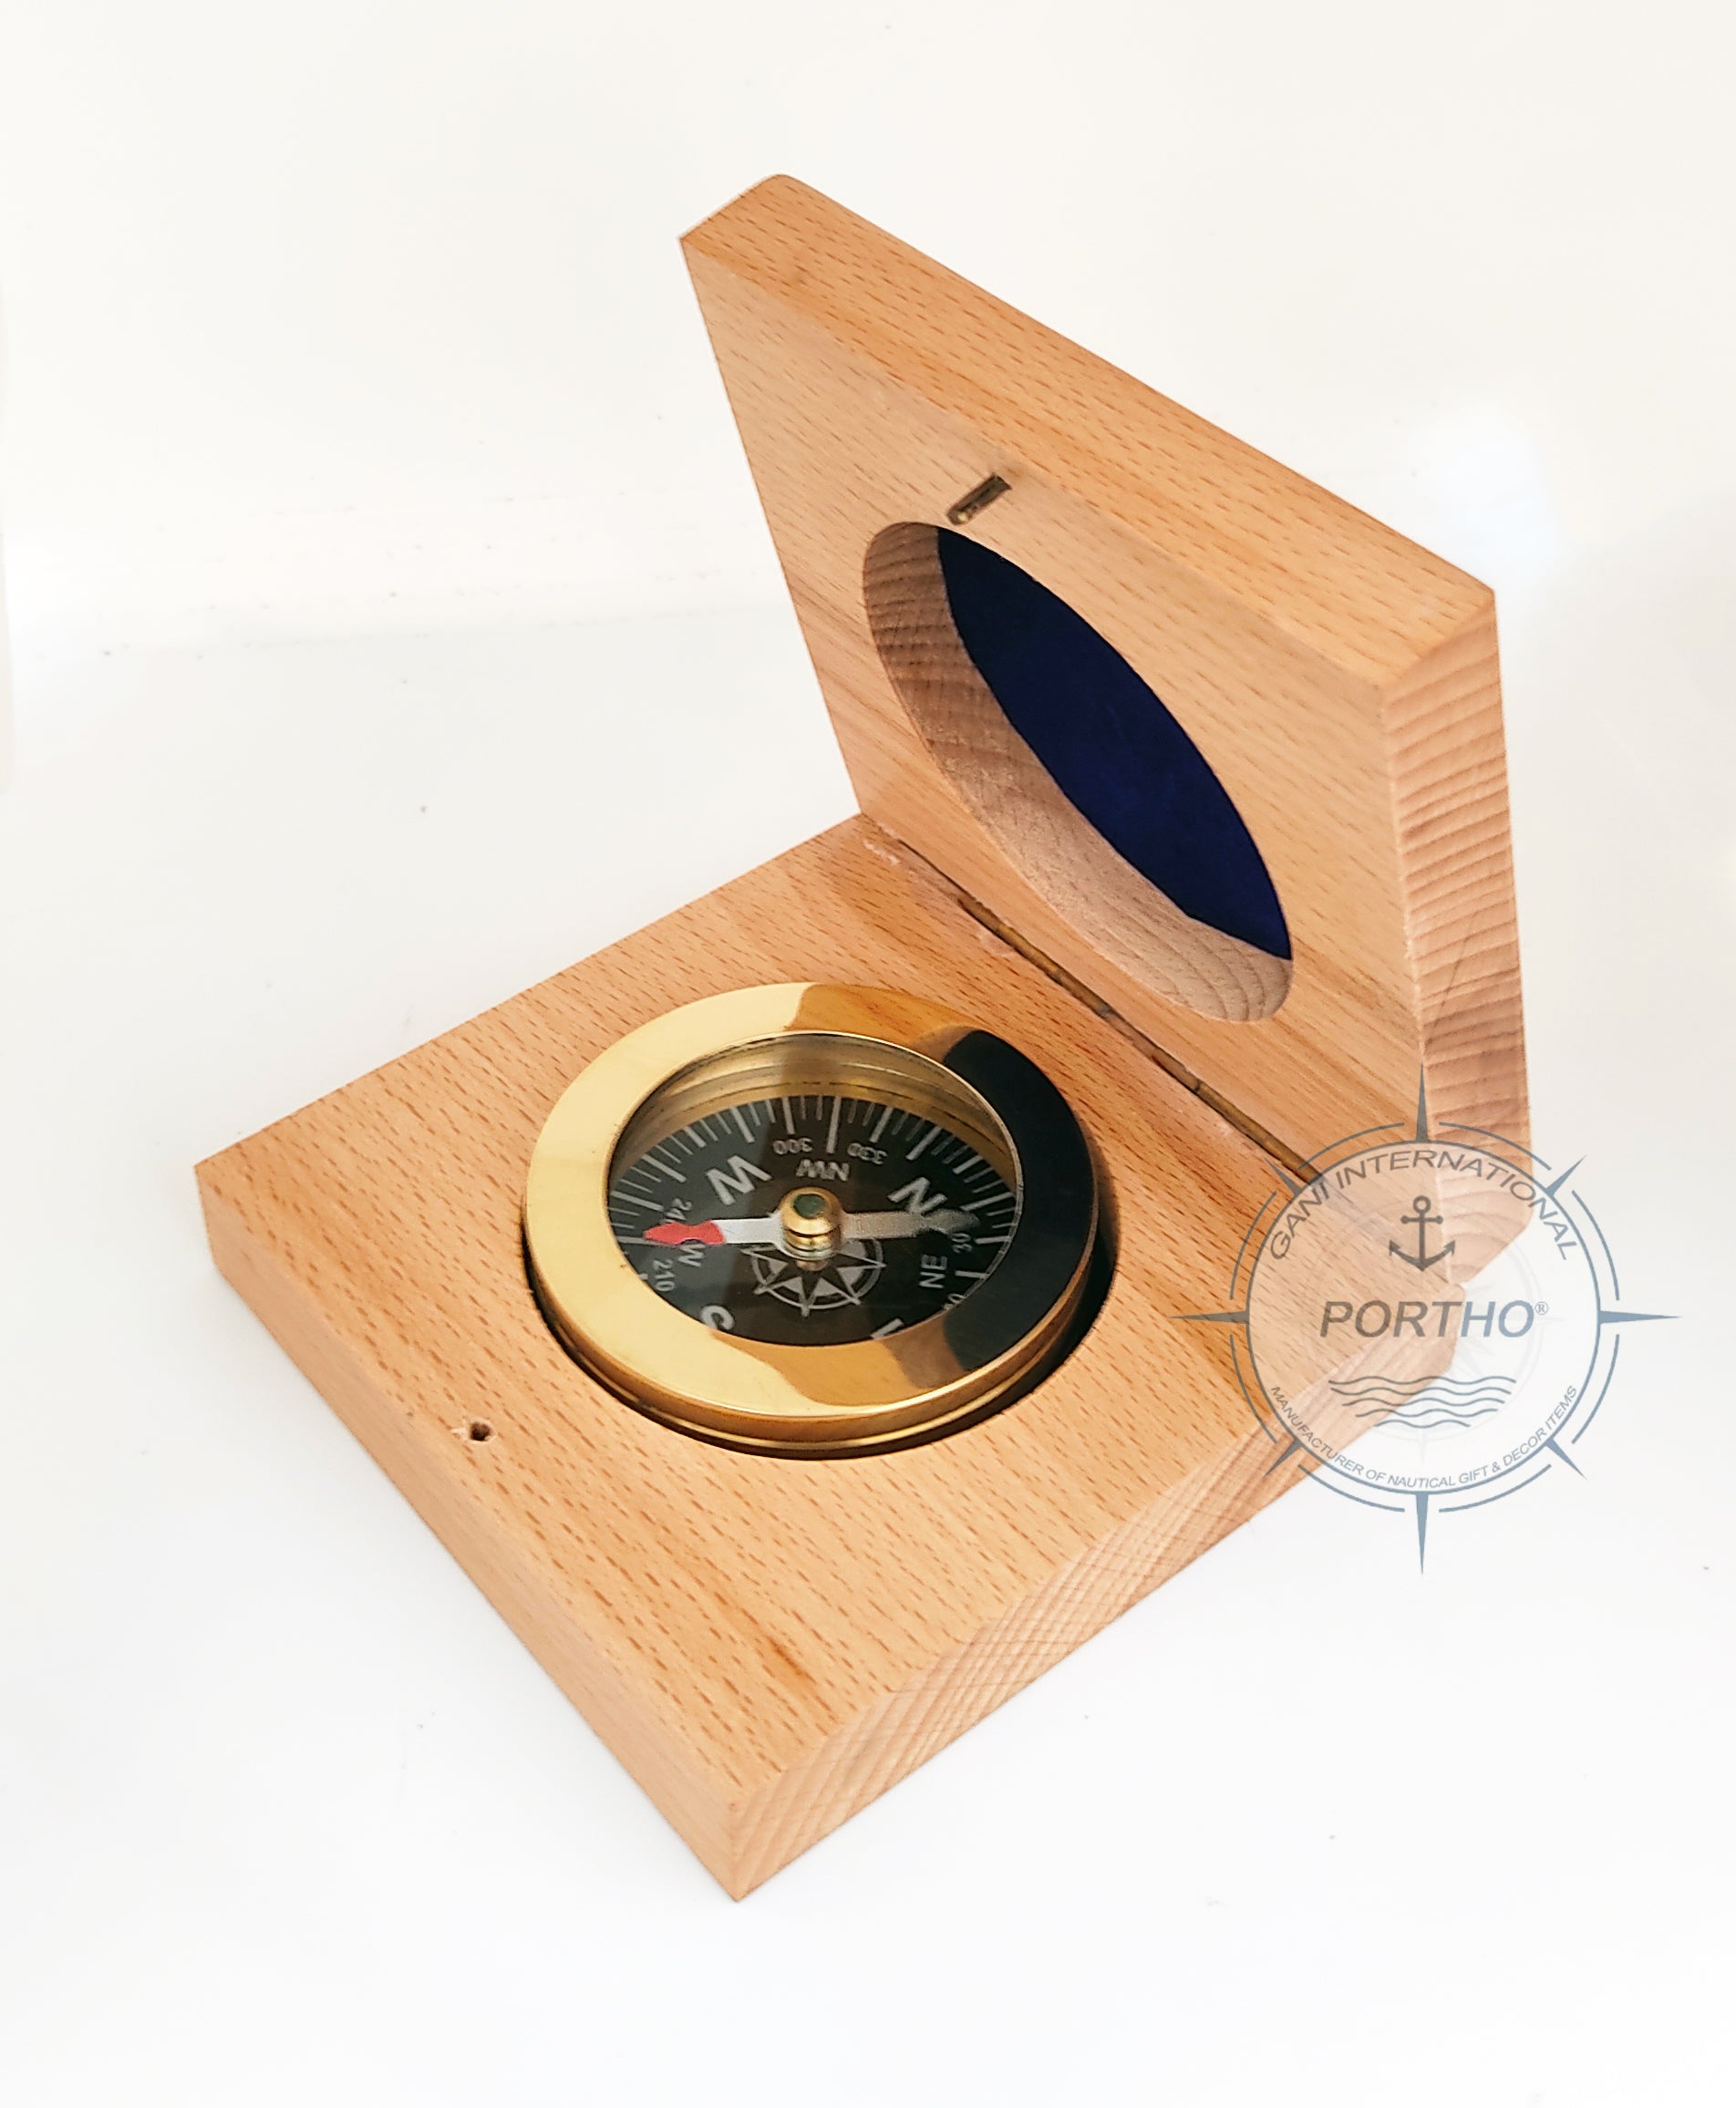 Nautical Shiny Brass Flat Compass With Wooden Box Anniversary Gift Brass Compass, Engraved Nautical compass Camping Hiking